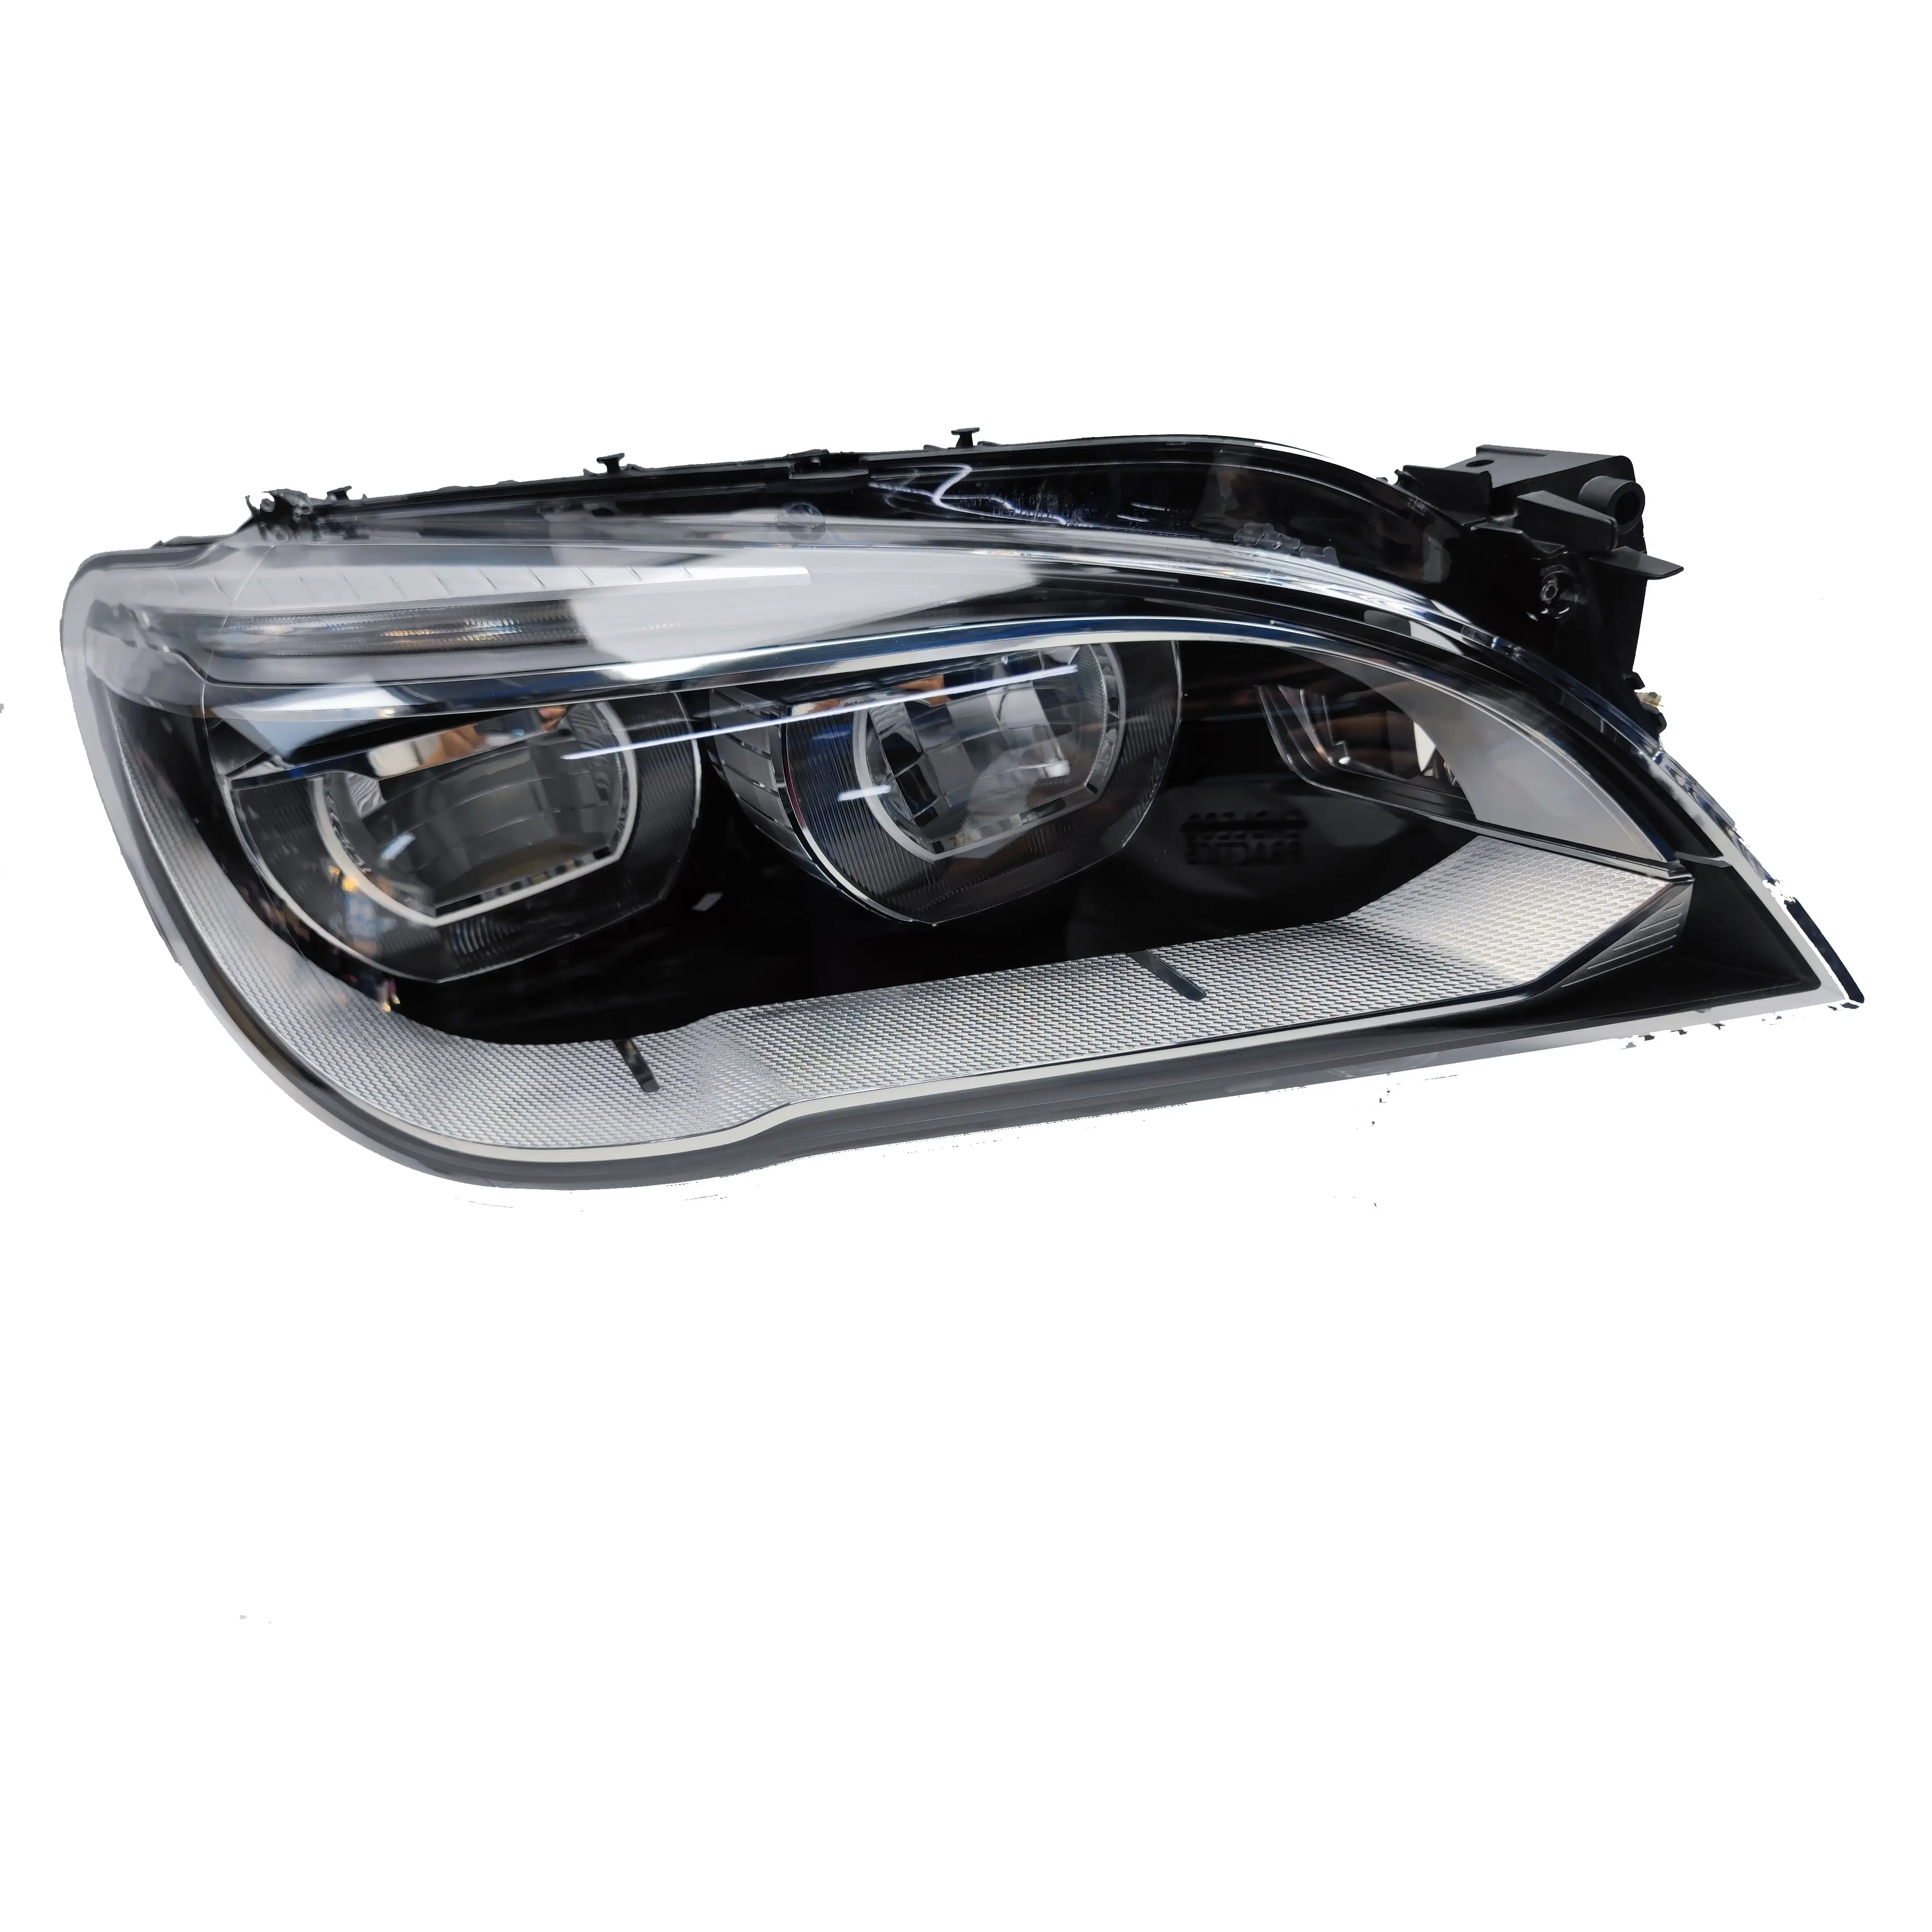 Apply to the new 7 Series F02 LED headlamps, high-quality automotive lighting system headlamps xenon headlamps.